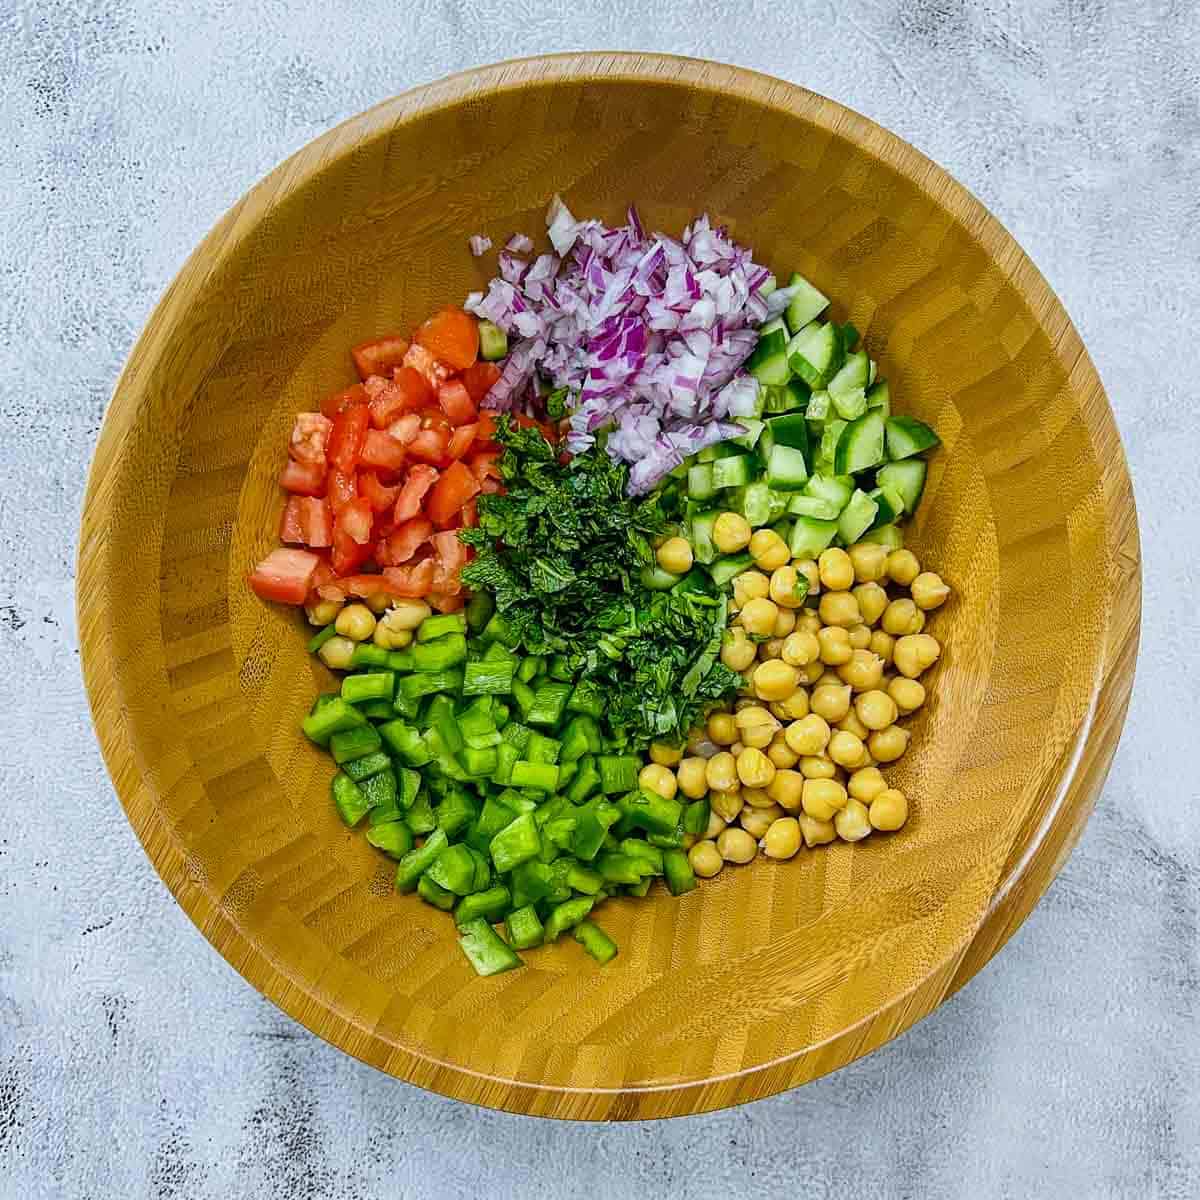 Chickpeas and rainbow veggies in a salad mixing bowl.